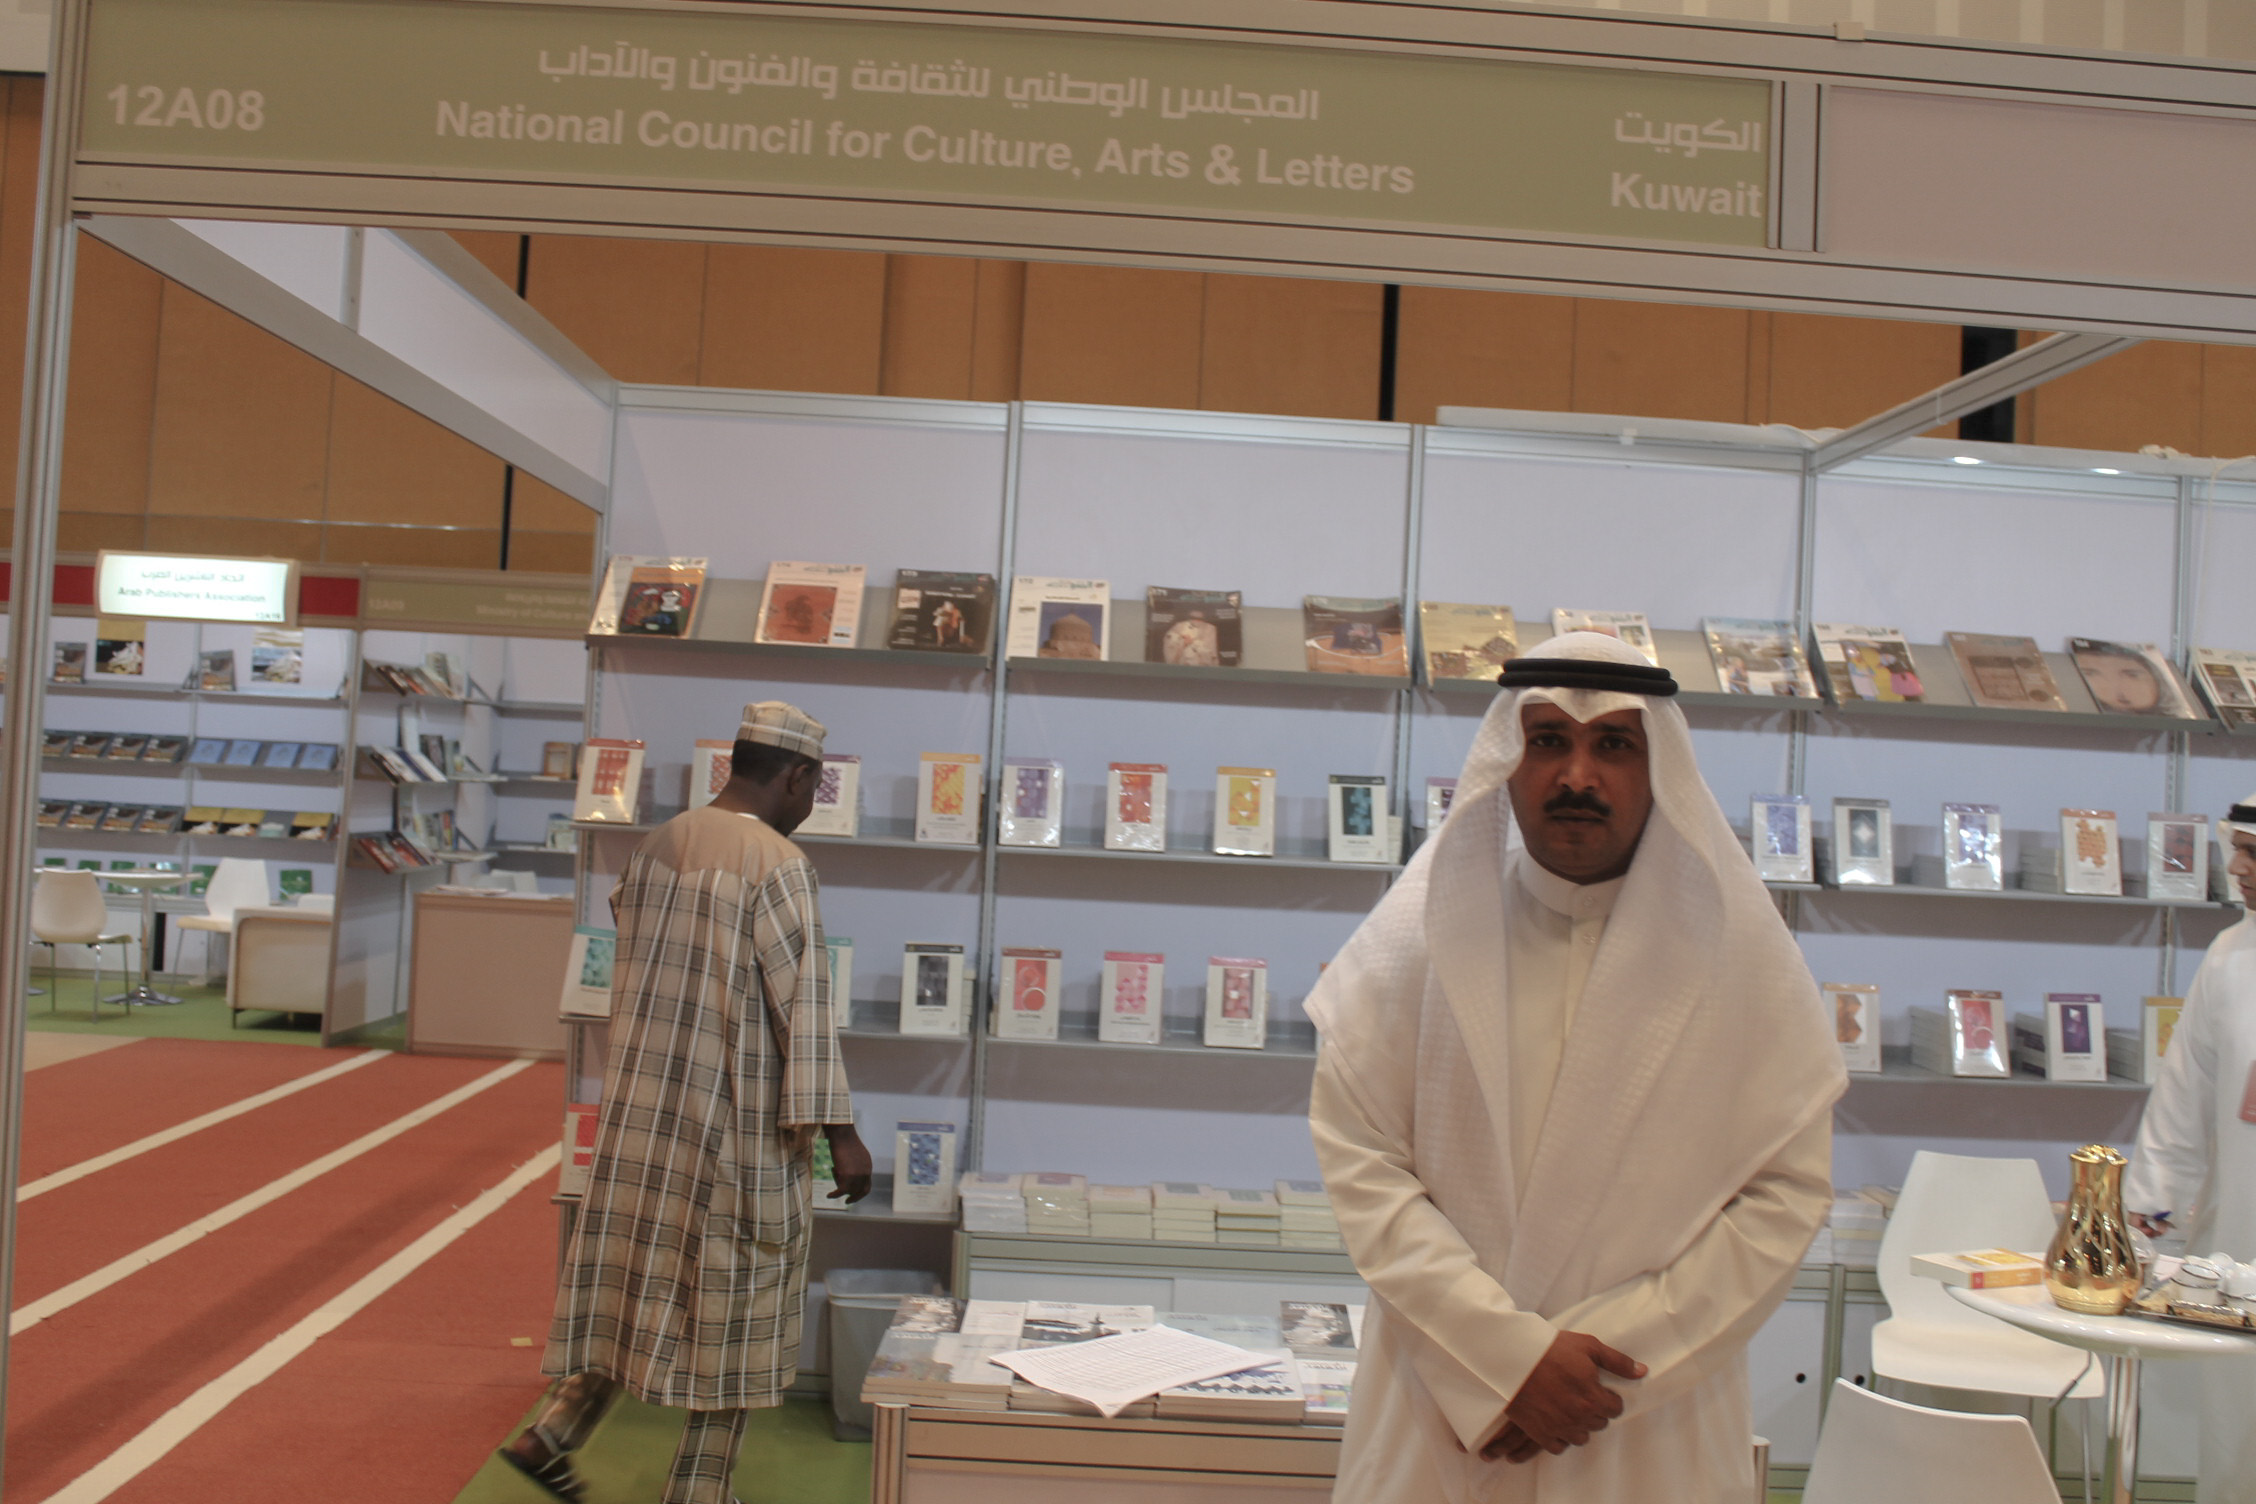 Deputy Director of Kuwait International Book Fair and representative of Kuwait National Council for Culture, Arts and Letters (NCCAL) Khalifa Al-Rubah